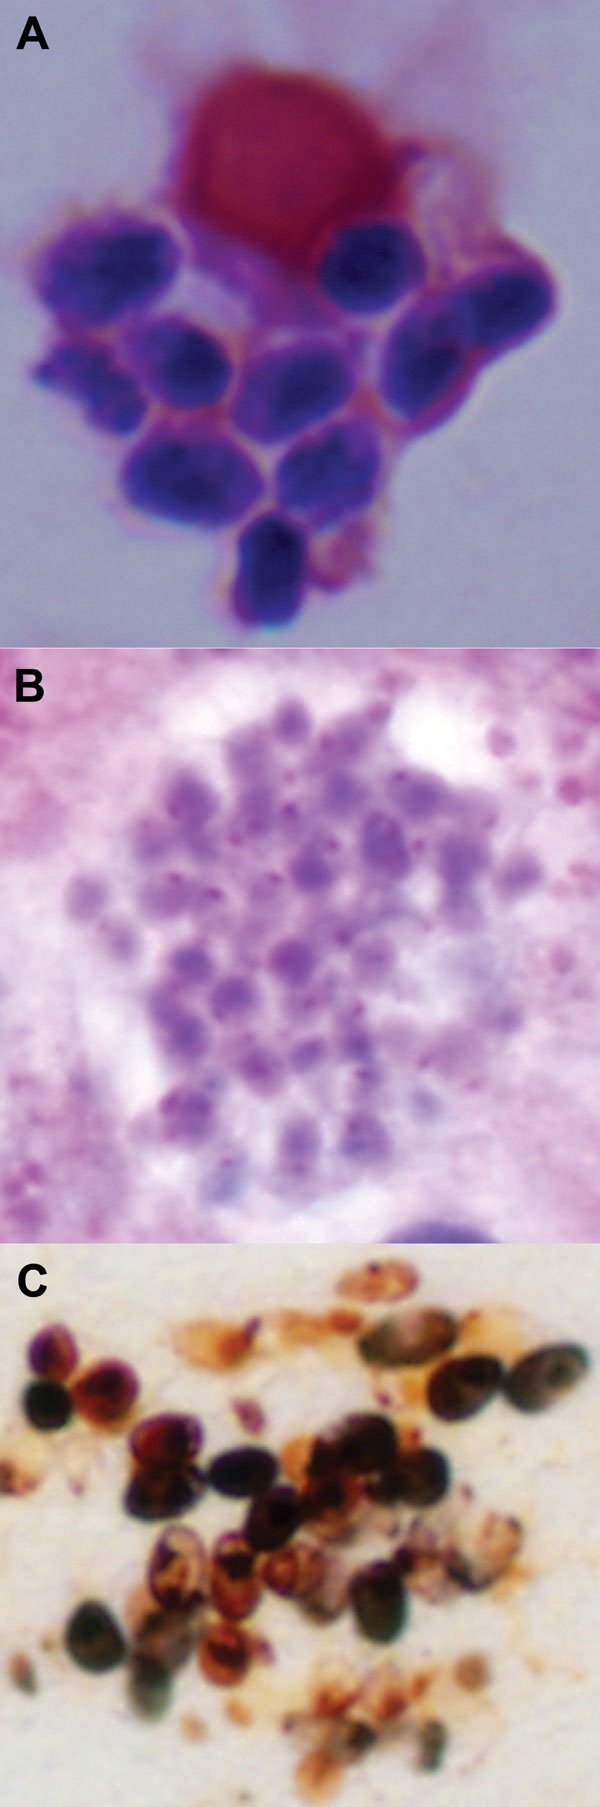 Microsporidium detected in clinical specimens from a stem cell transplant patient who had undergone substantial immunosuppression. A) Gram-stained ascitic fluid (original magnification 1,000×). B) Hematoxylin and eosin–stained liver biopsy sample. C) Warthin-Starry–stained liver biopsy sample (original magnification 600×).